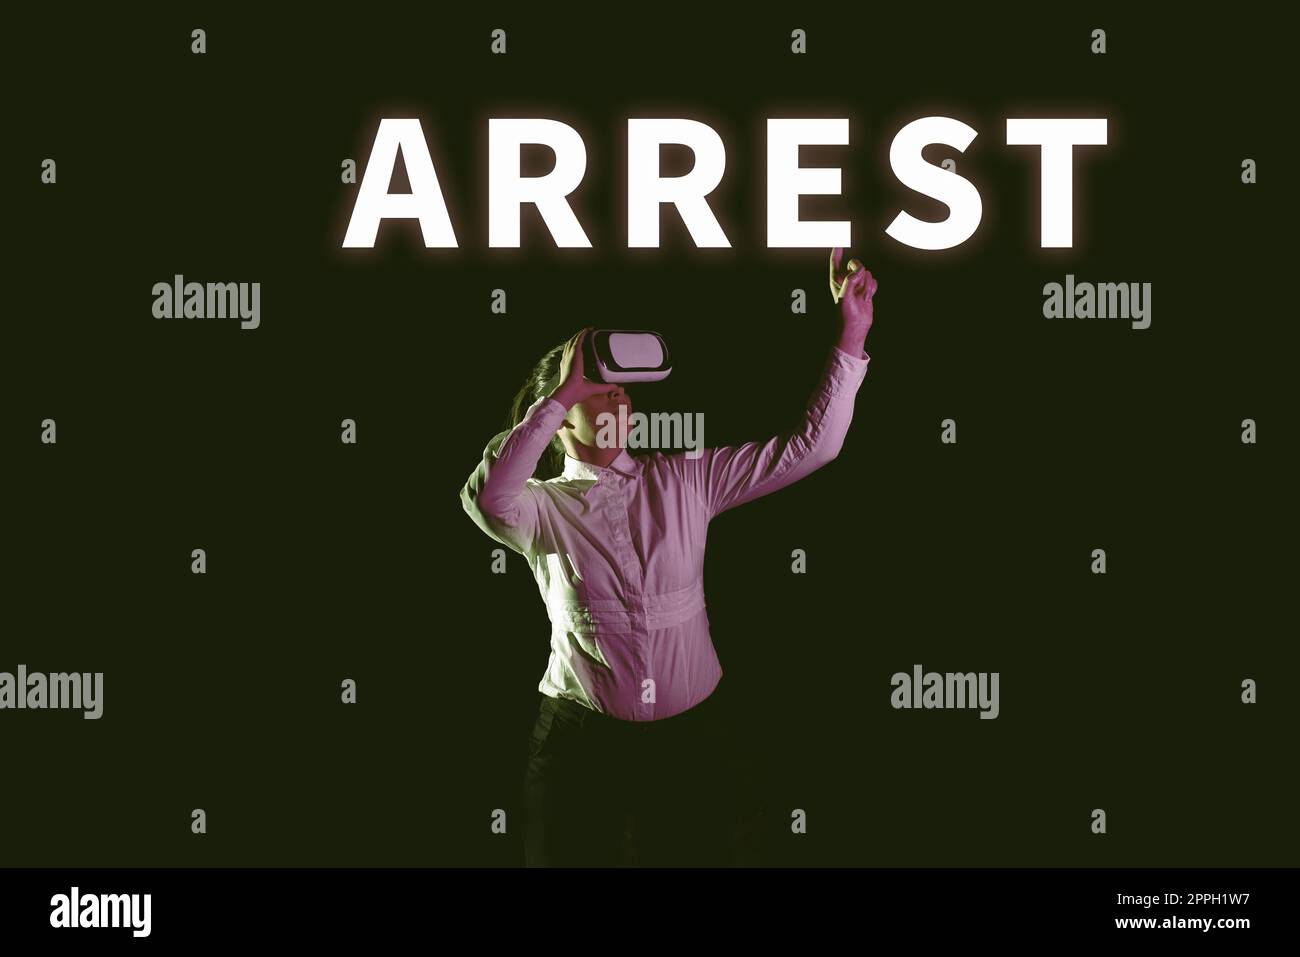 Inspiration showing sign Arrest. Internet Concept seize someone by legal authority and take them into custody Stock Photo